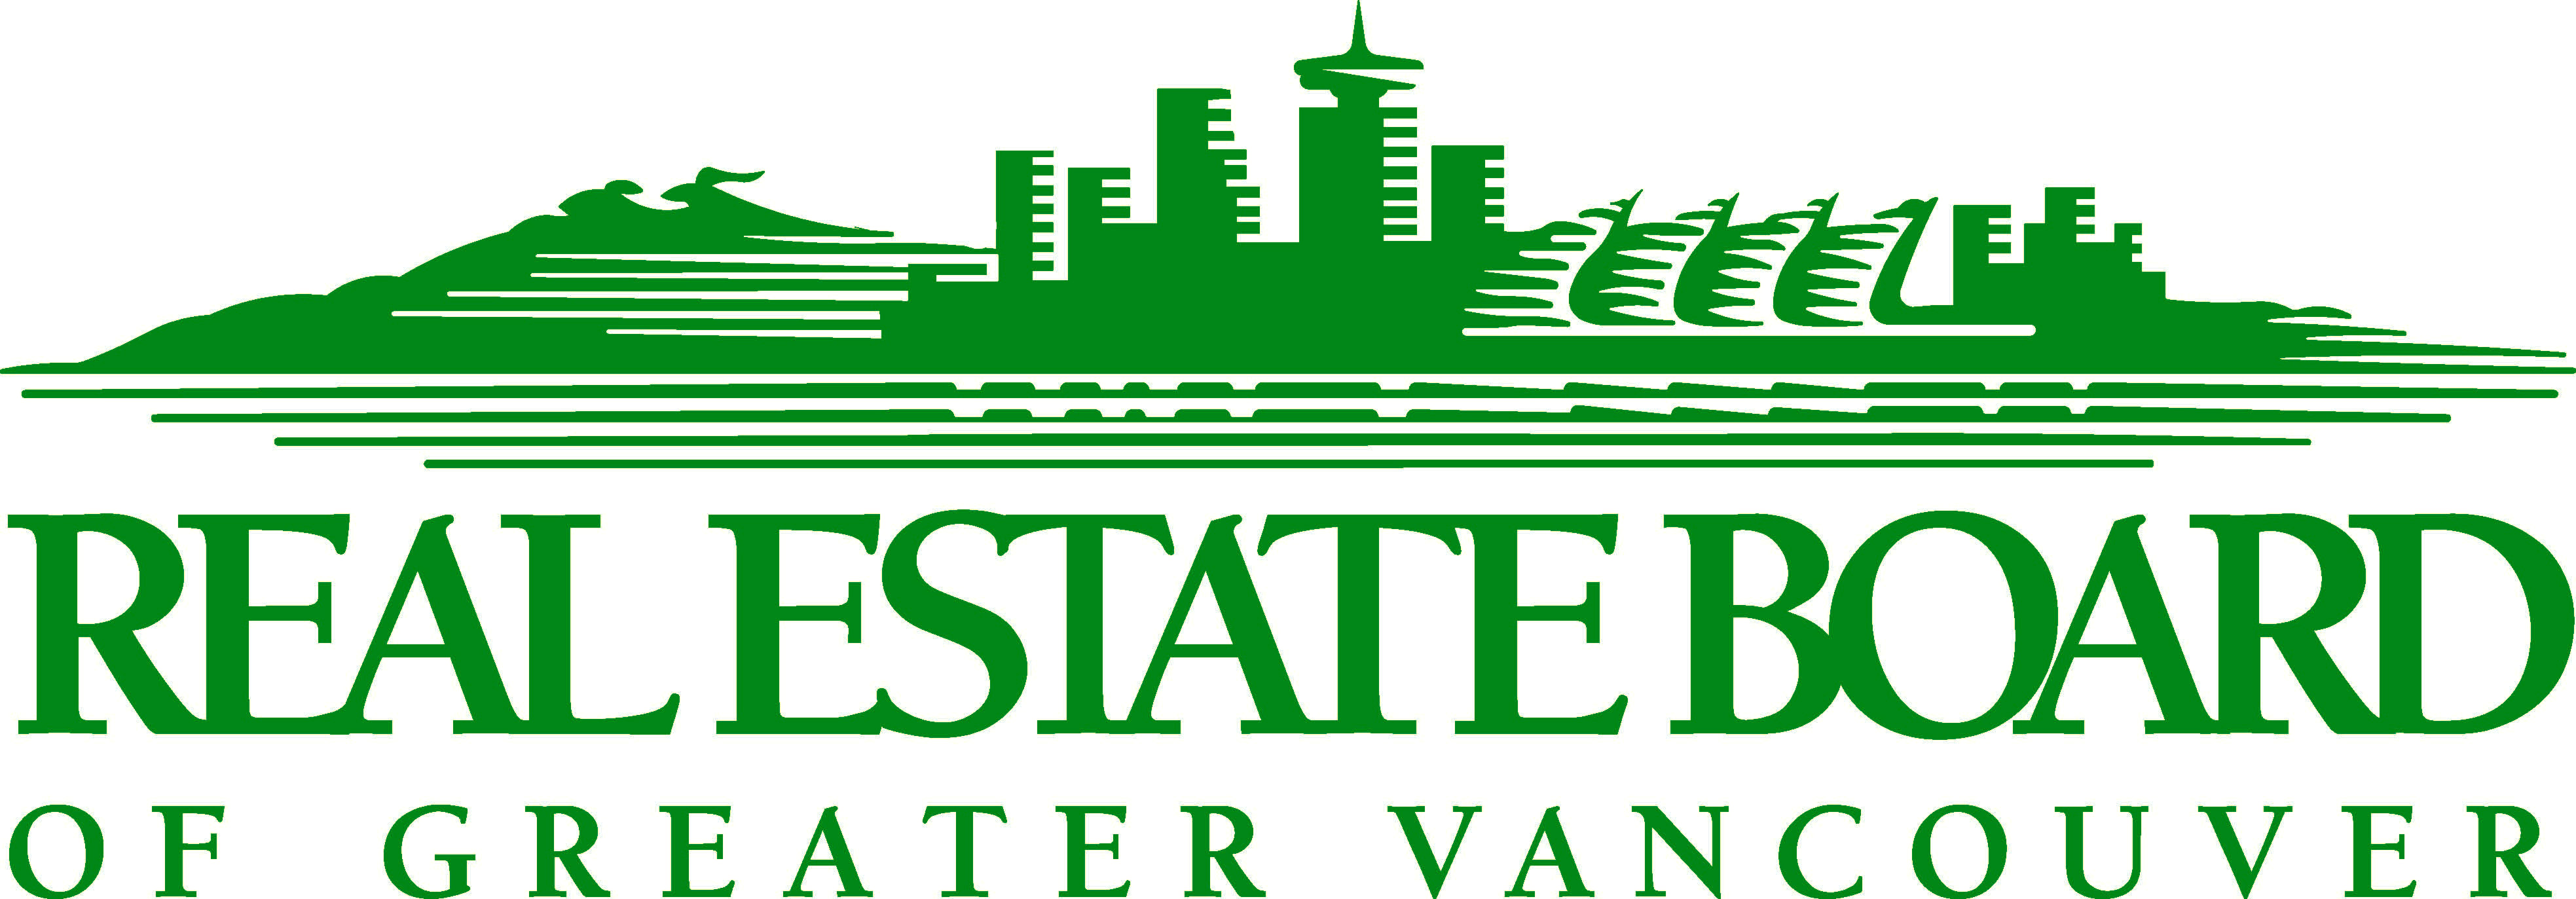 Real Estate Board of Greater Vancouver Logo